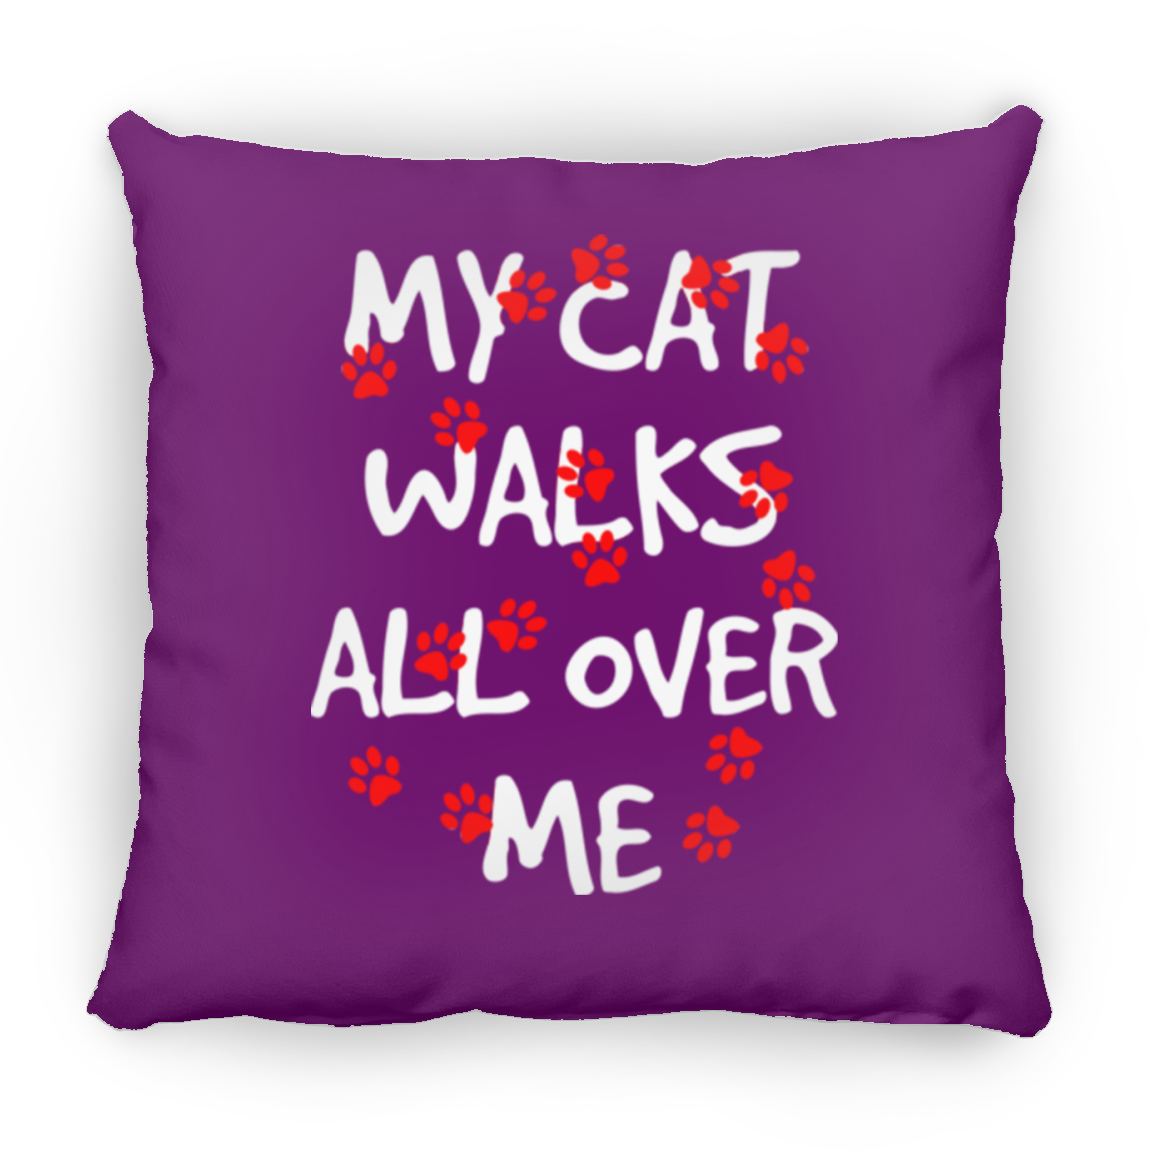 My Cat Walks All Over Me - Pillows